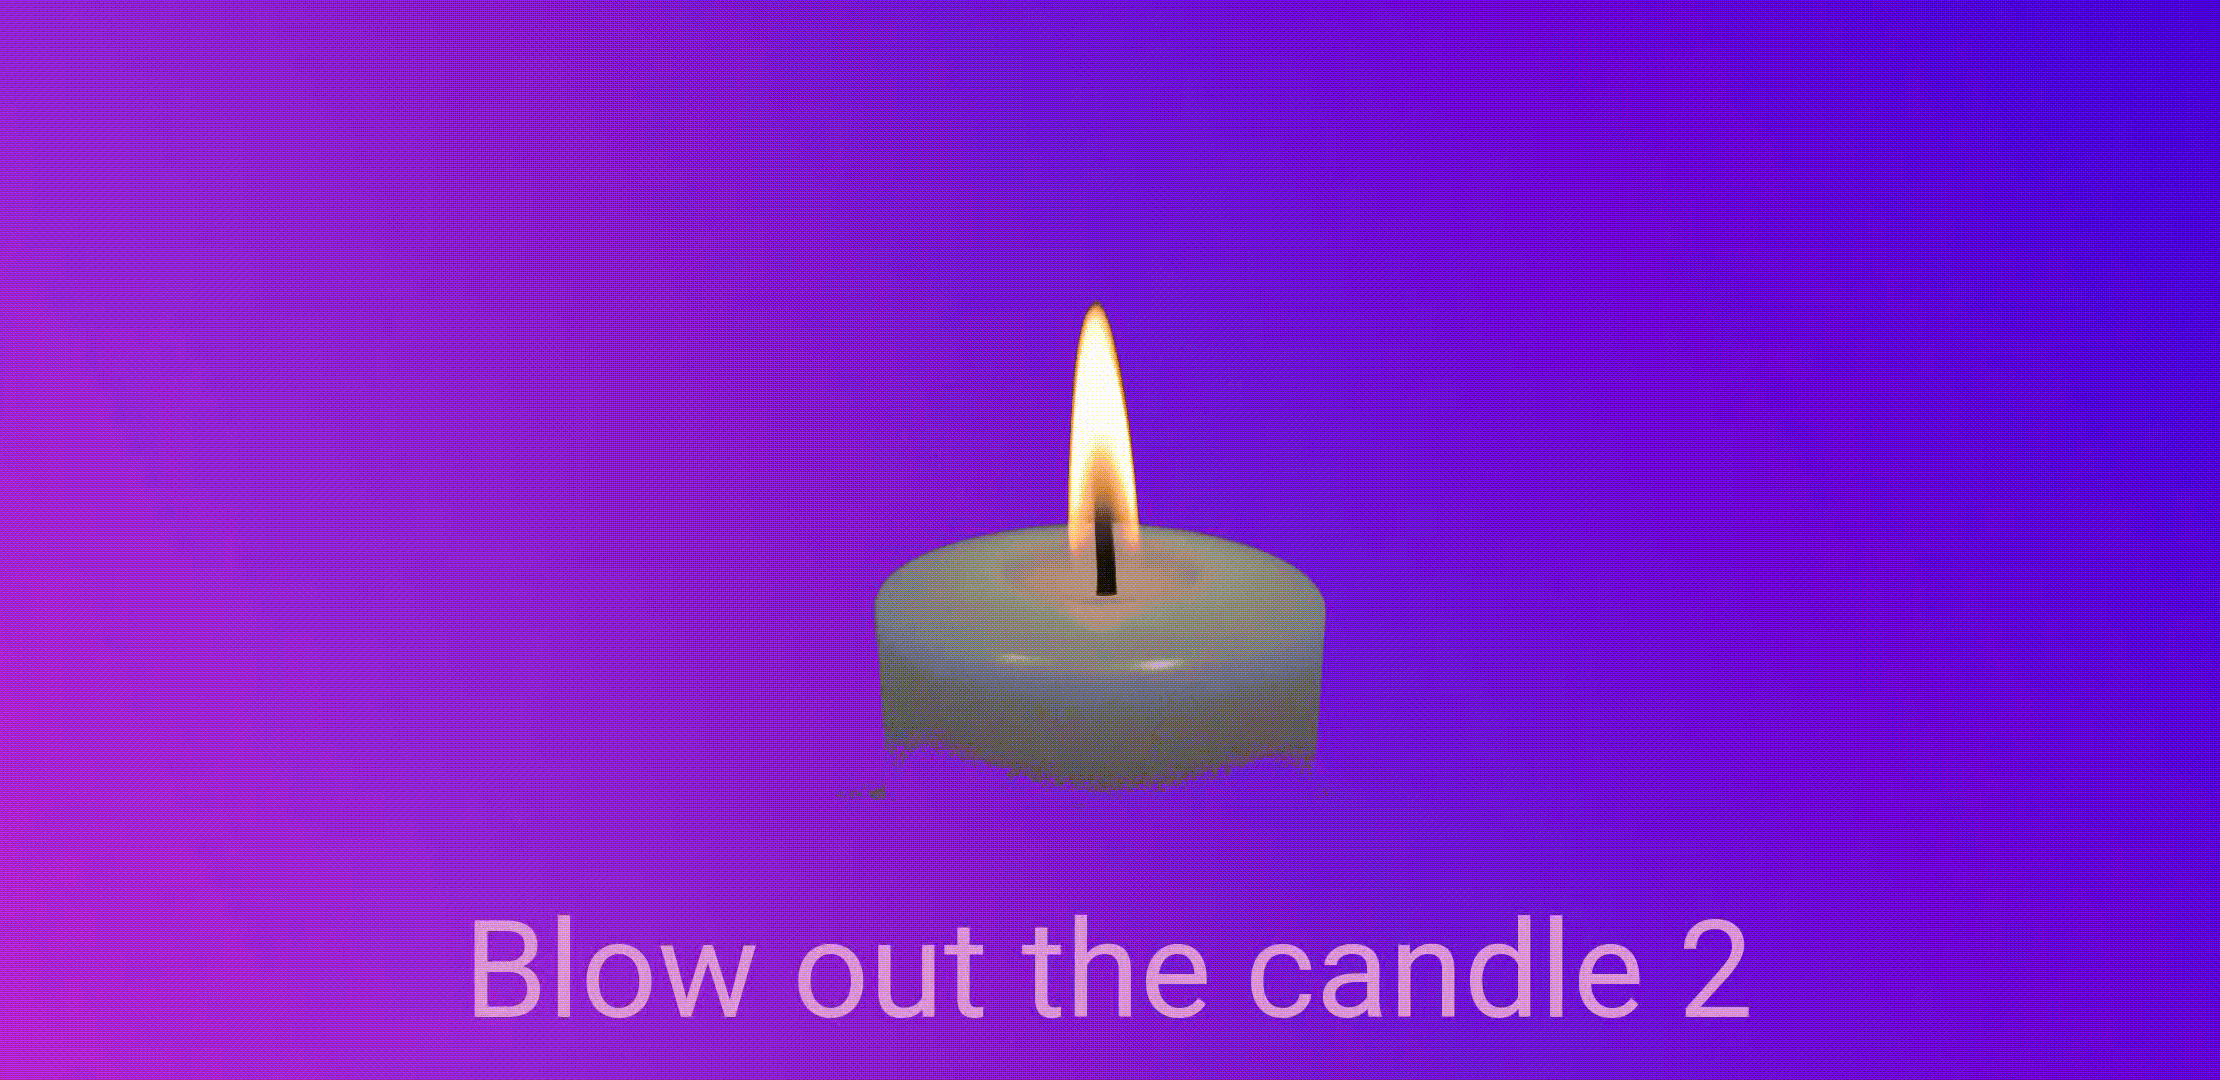 git with expanding flower cross fading into a shrinking candle. Instructions and time are shown below.